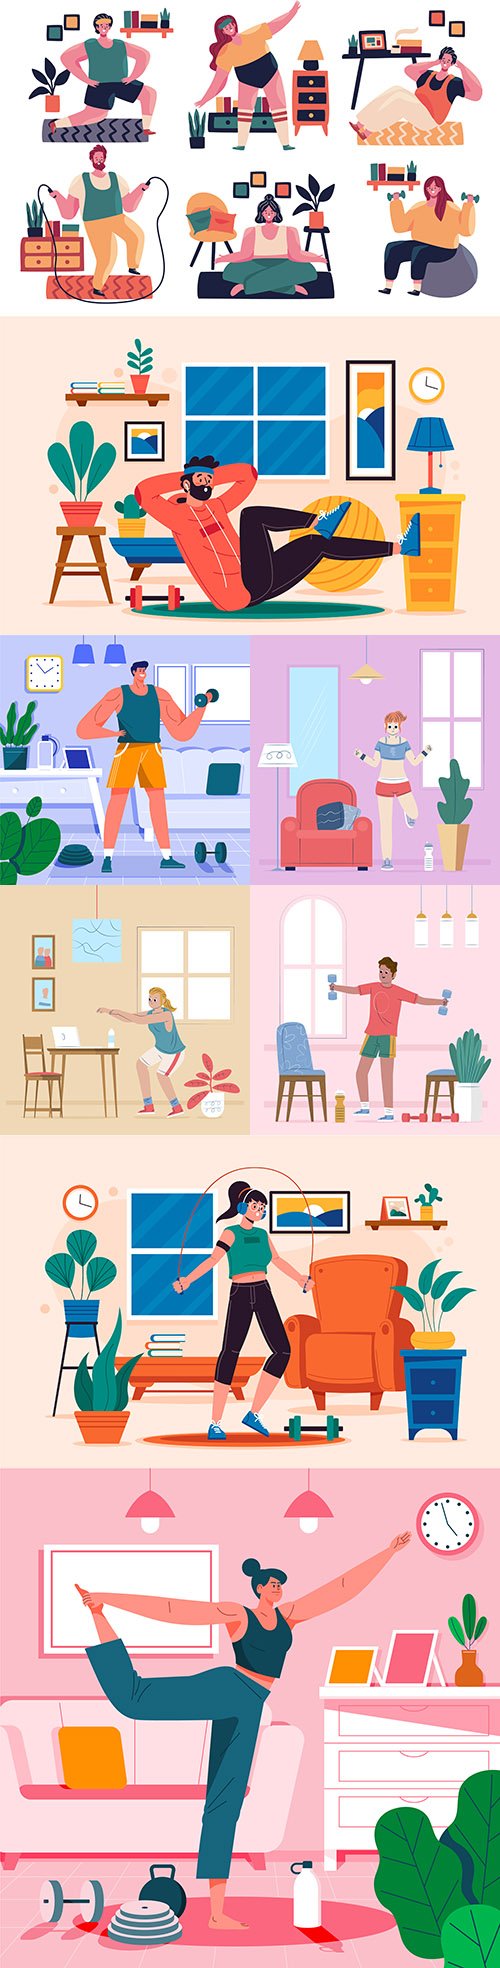 Teaching and sports at home concept illustrations